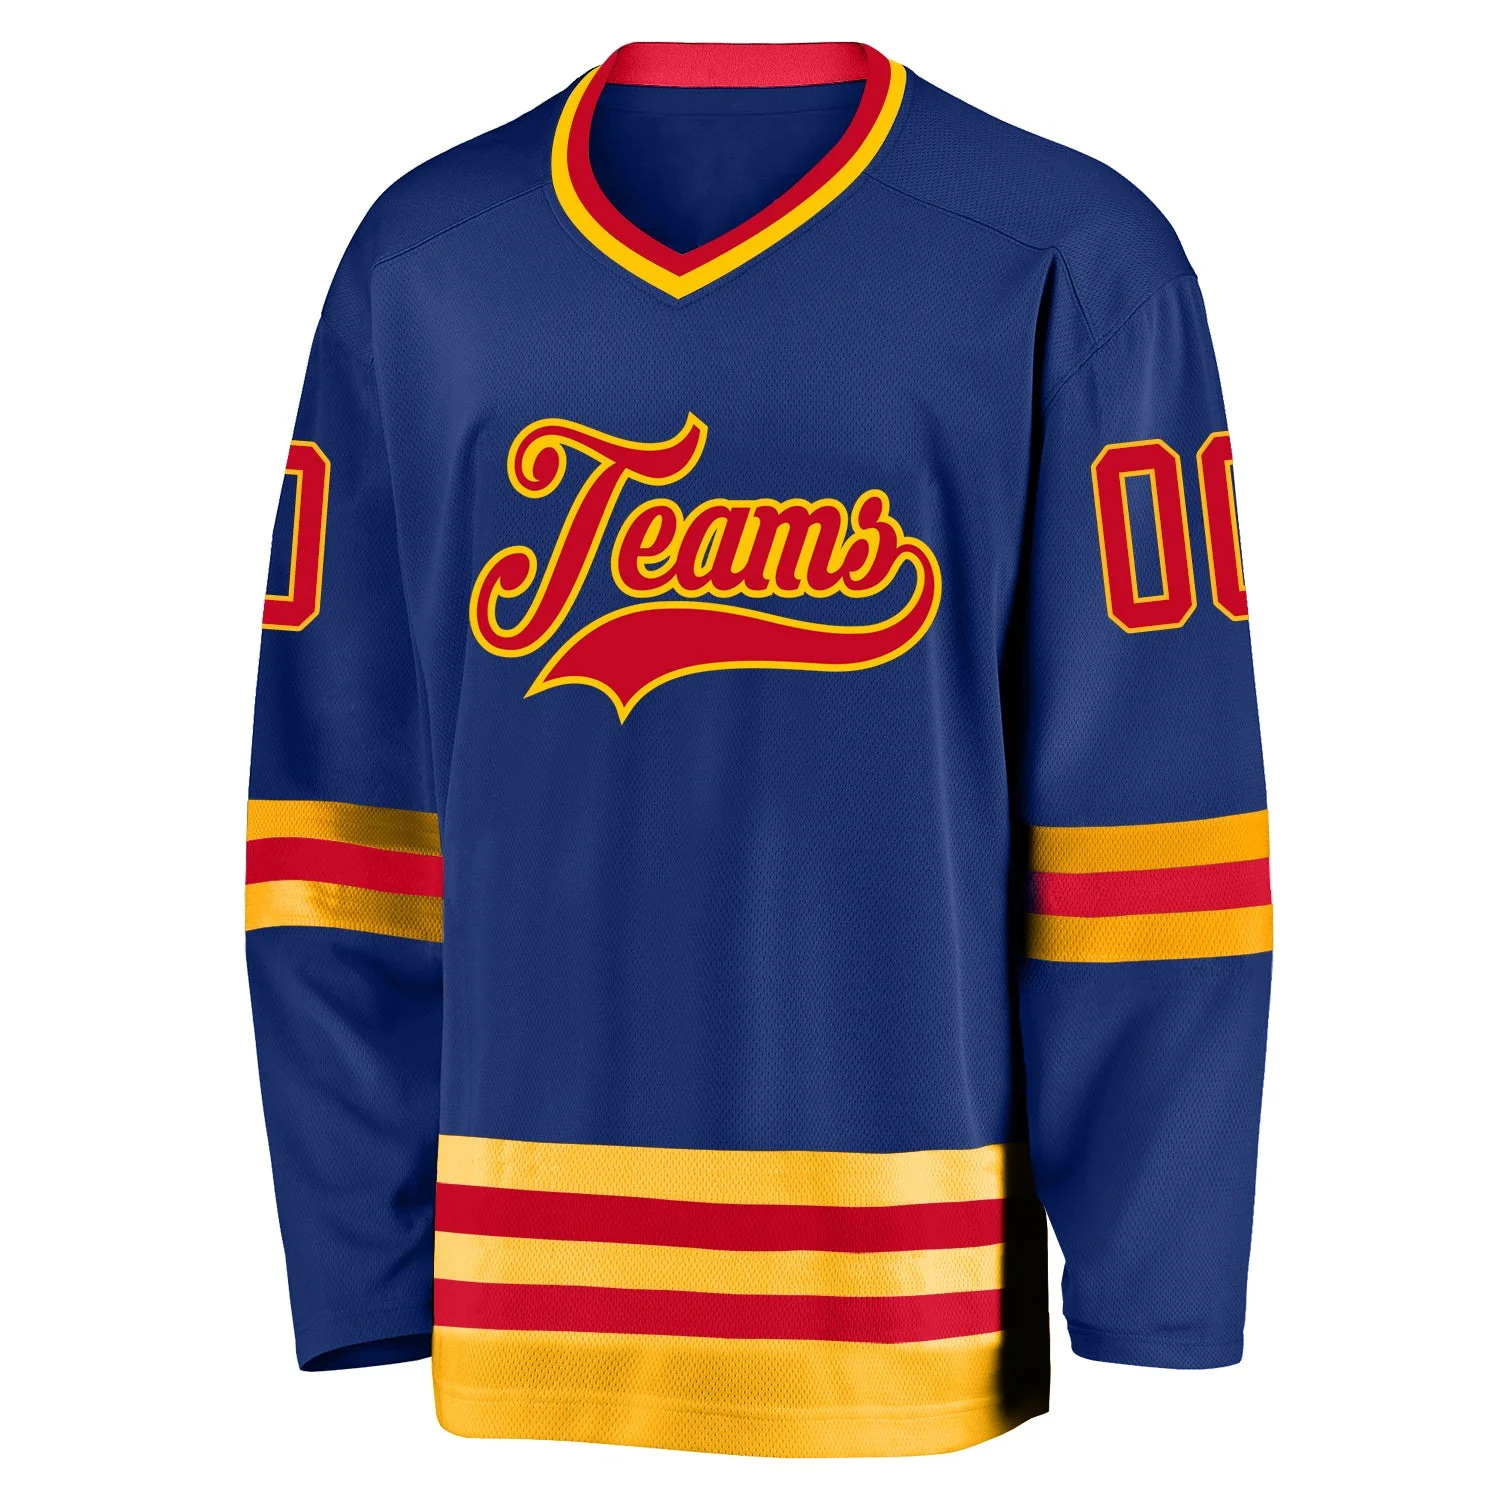 Inktee Store - Stitched And Print Royal Red-Gold Hockey Jersey Custom Image